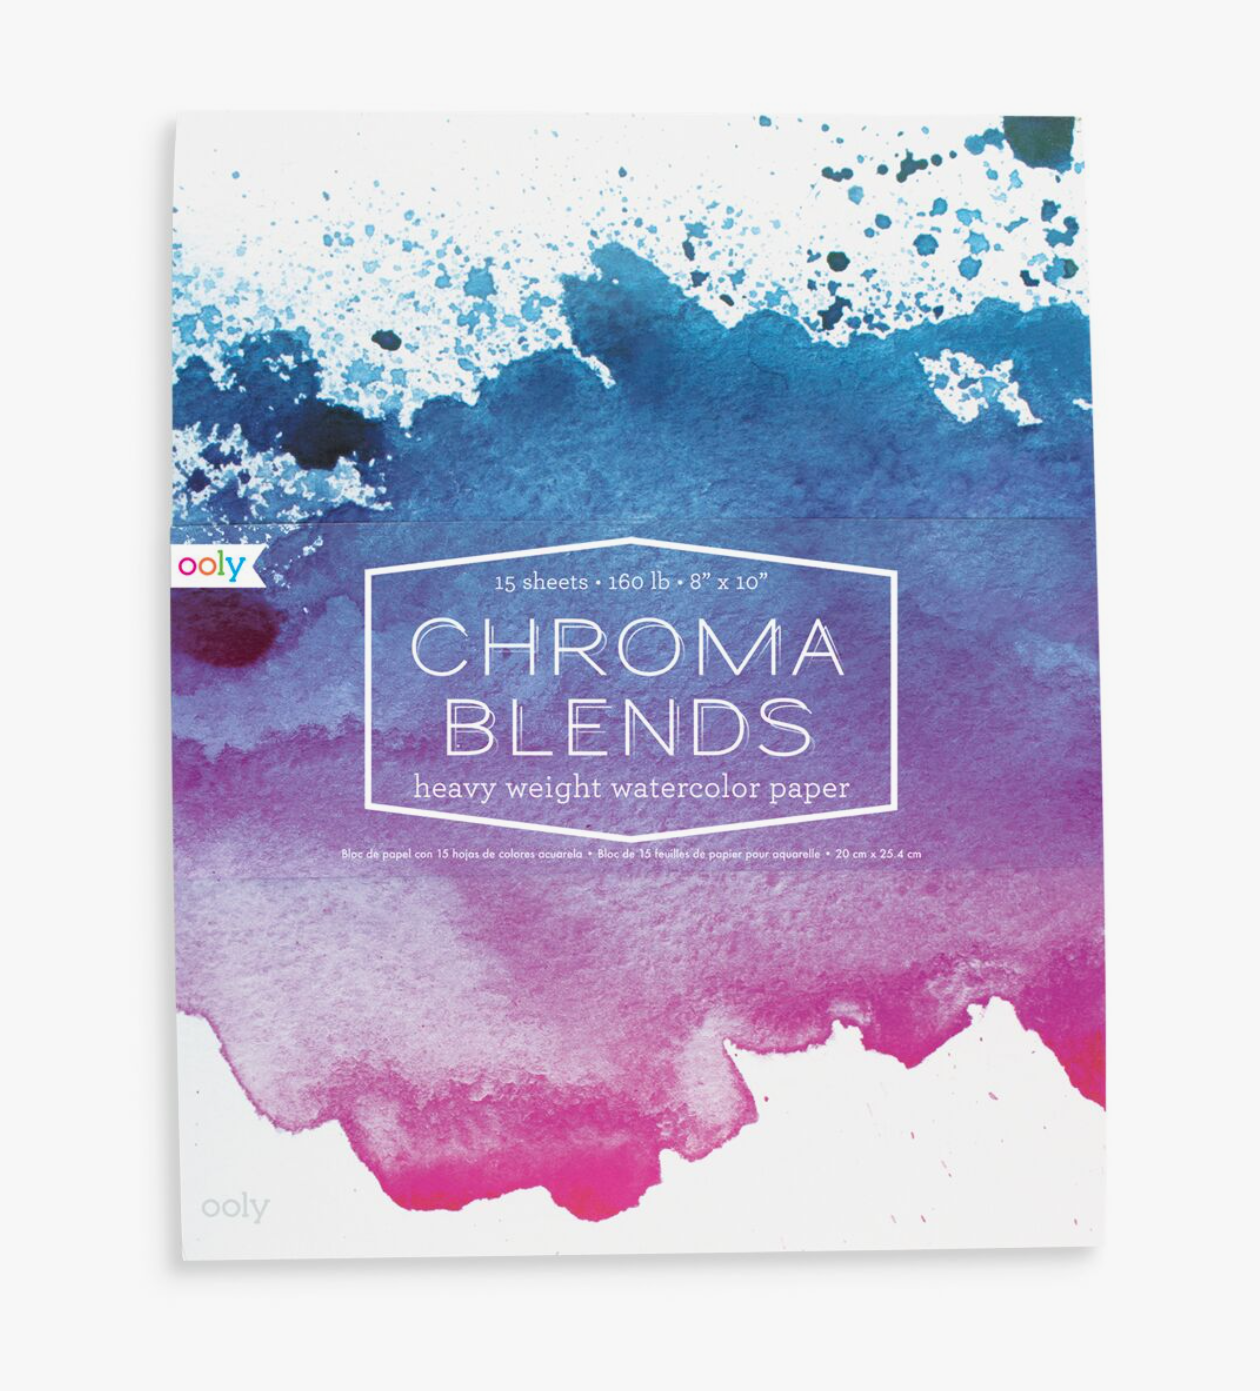 Ooly 8" X 10" Chroma Blends Watercolor Pad